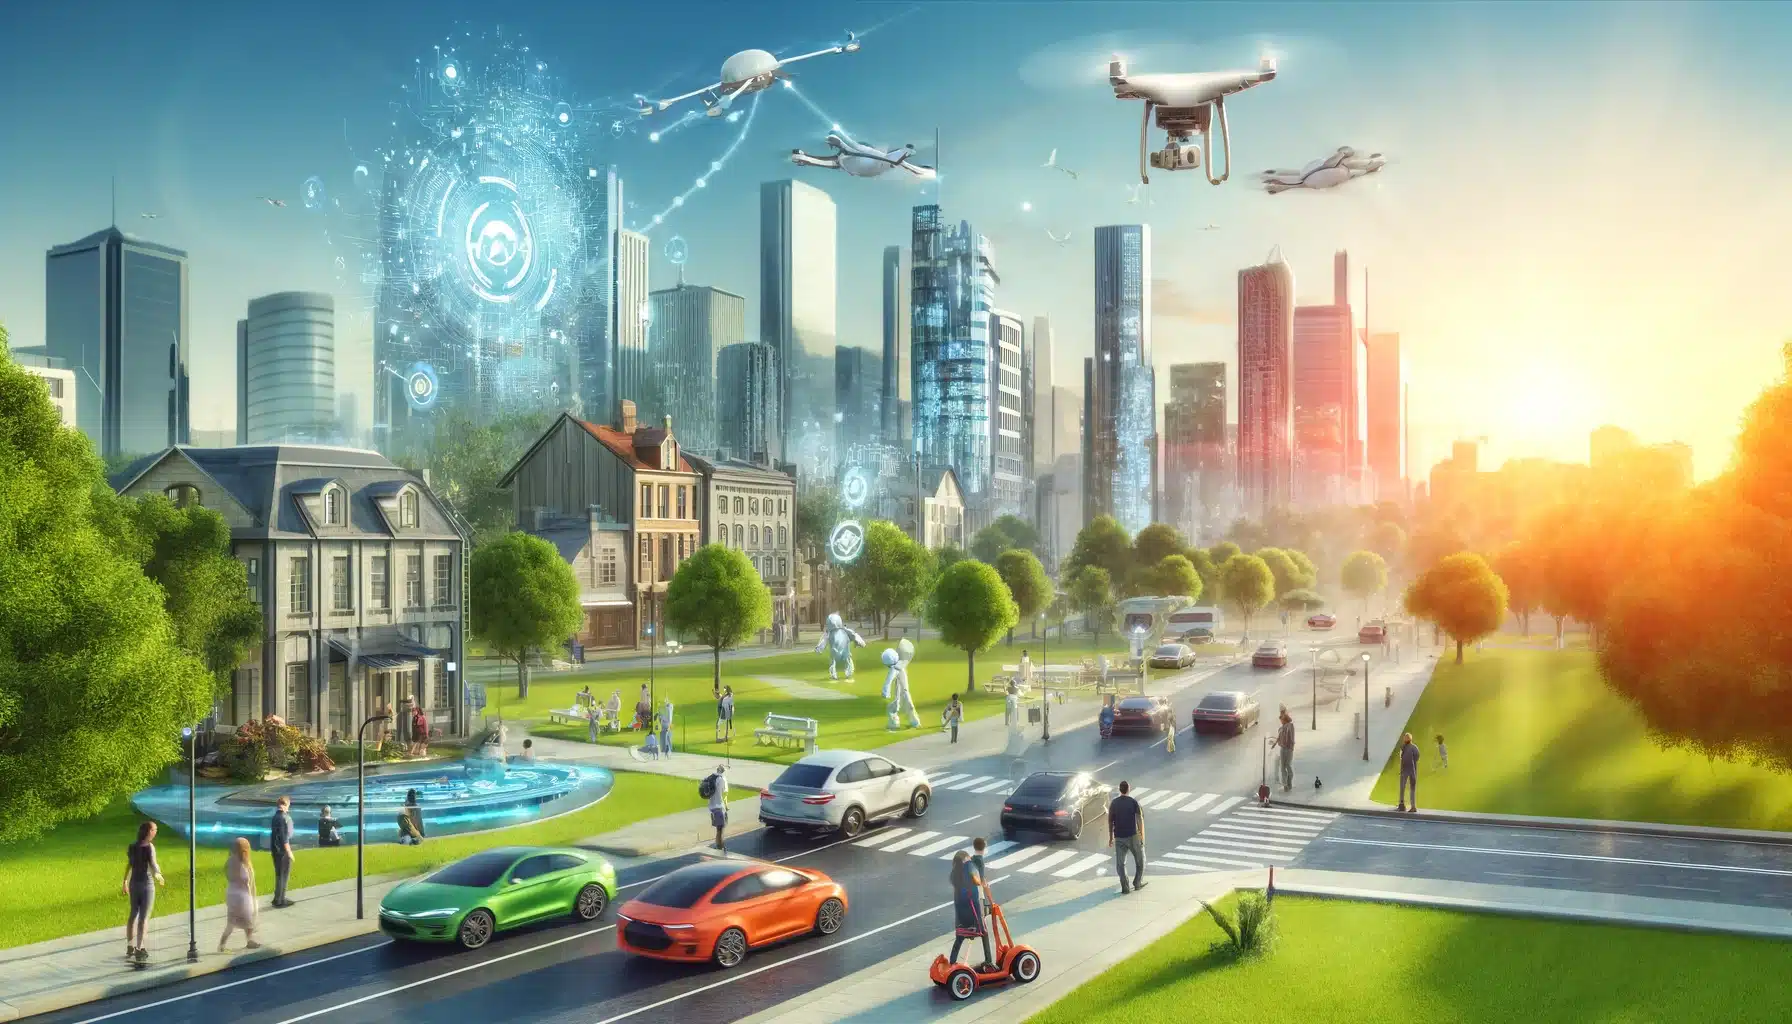 Visualize a cityscape in the future, powered by artificial intelligence. Include autonomous vehicles, smart buildings with interactive facades, drones